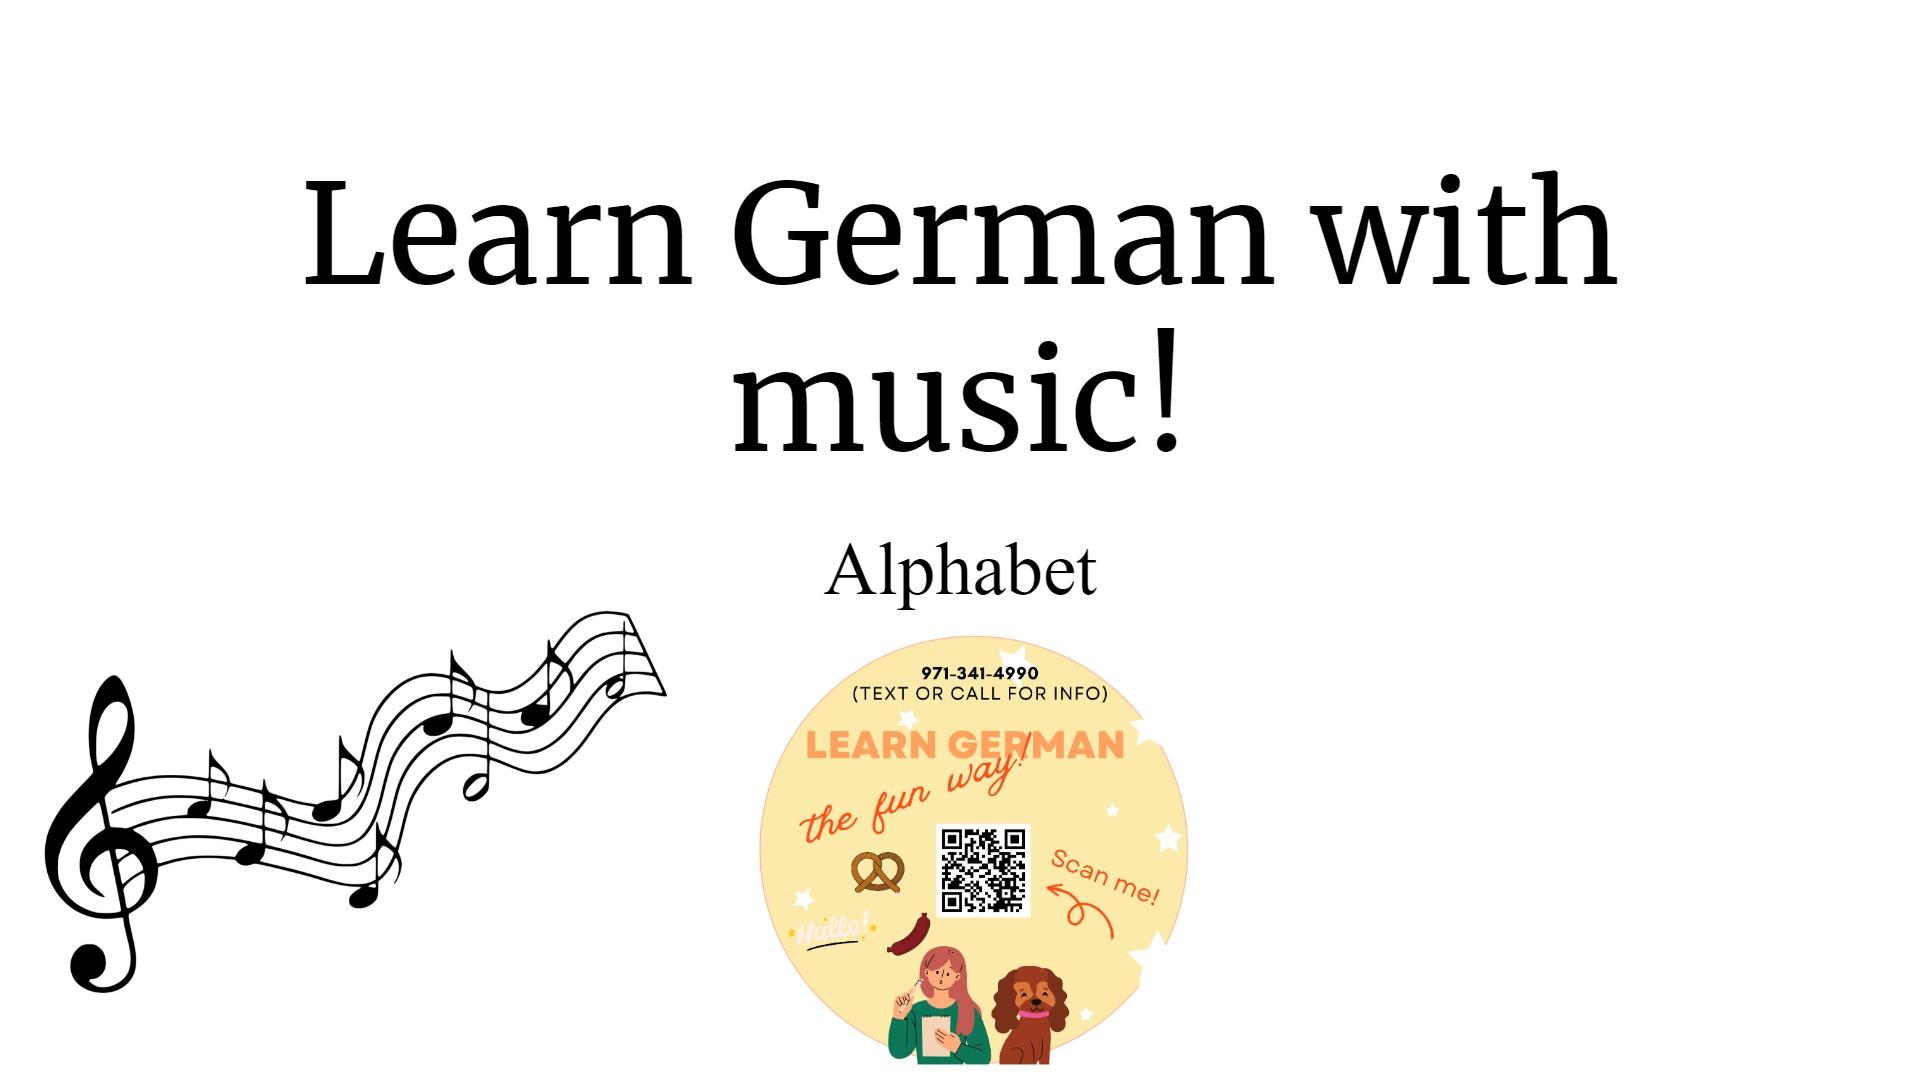 Alphabet and Pronunciation in German: Learn German with Music! (Episode 3)